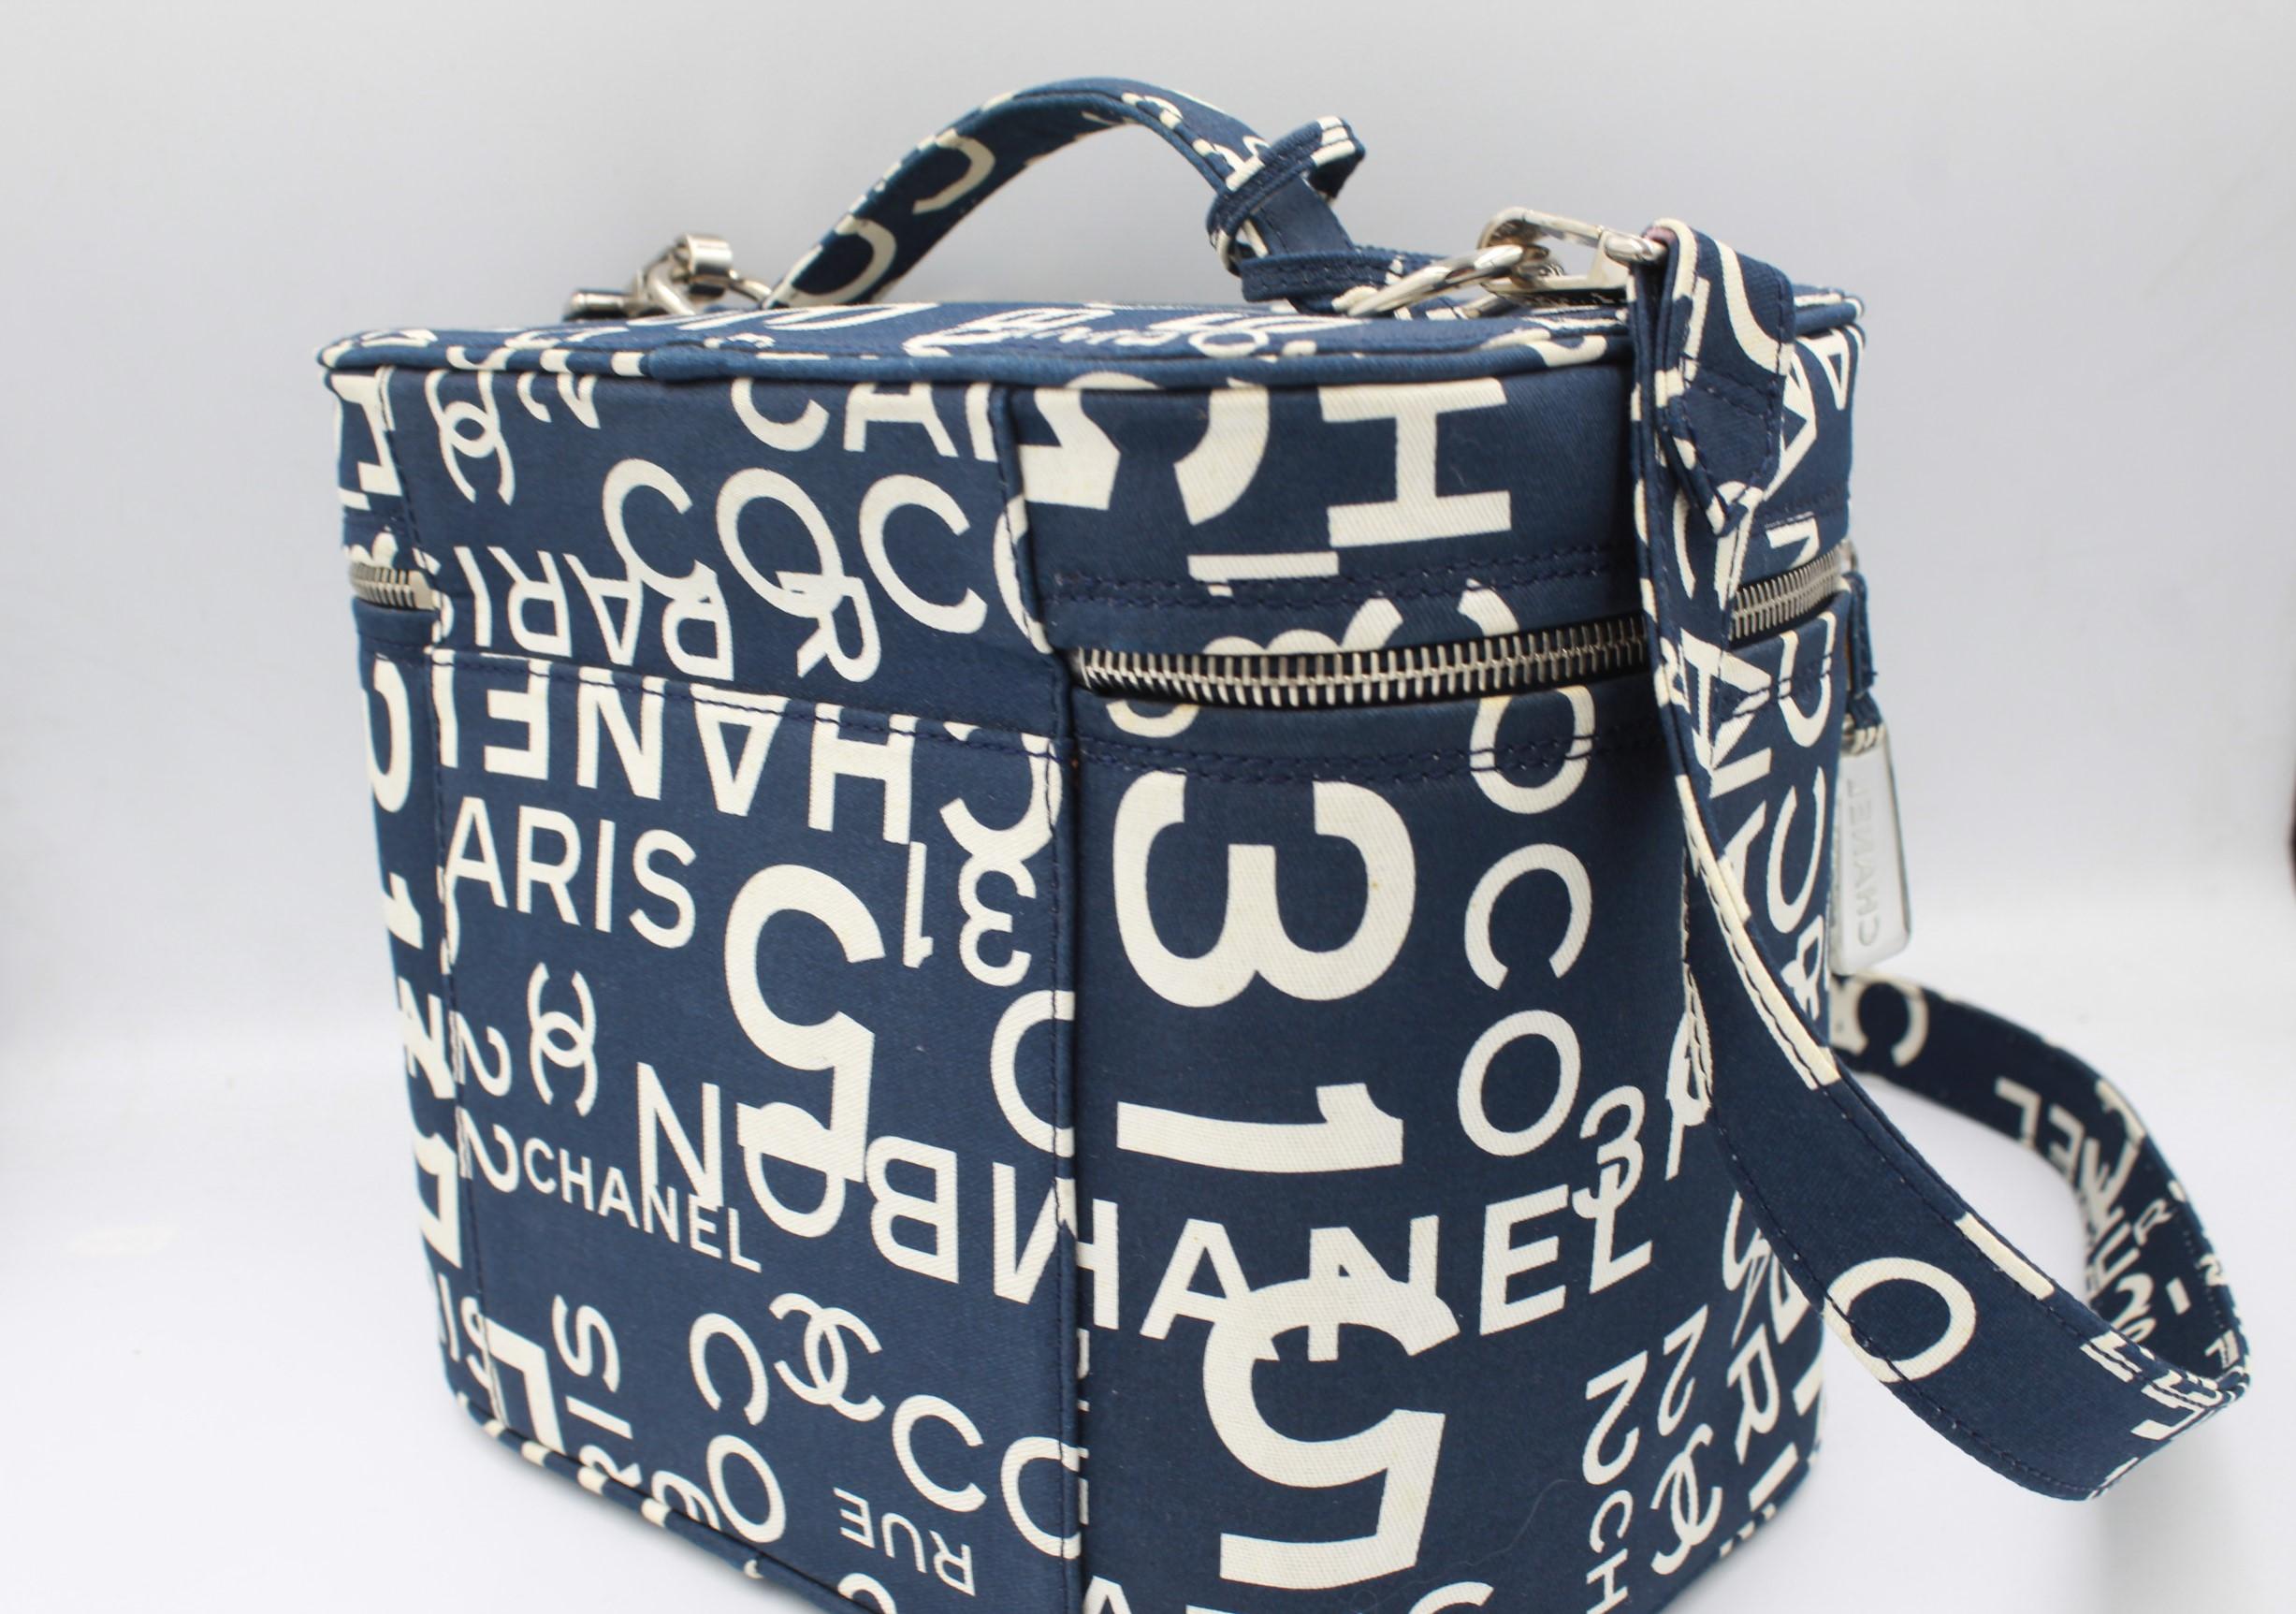 Chanel vanity case in canvas, print « Cambon ».
Very good condition ( outside and inside )
Sold with its shoulder strap.
19cm x 14cm x 16cm